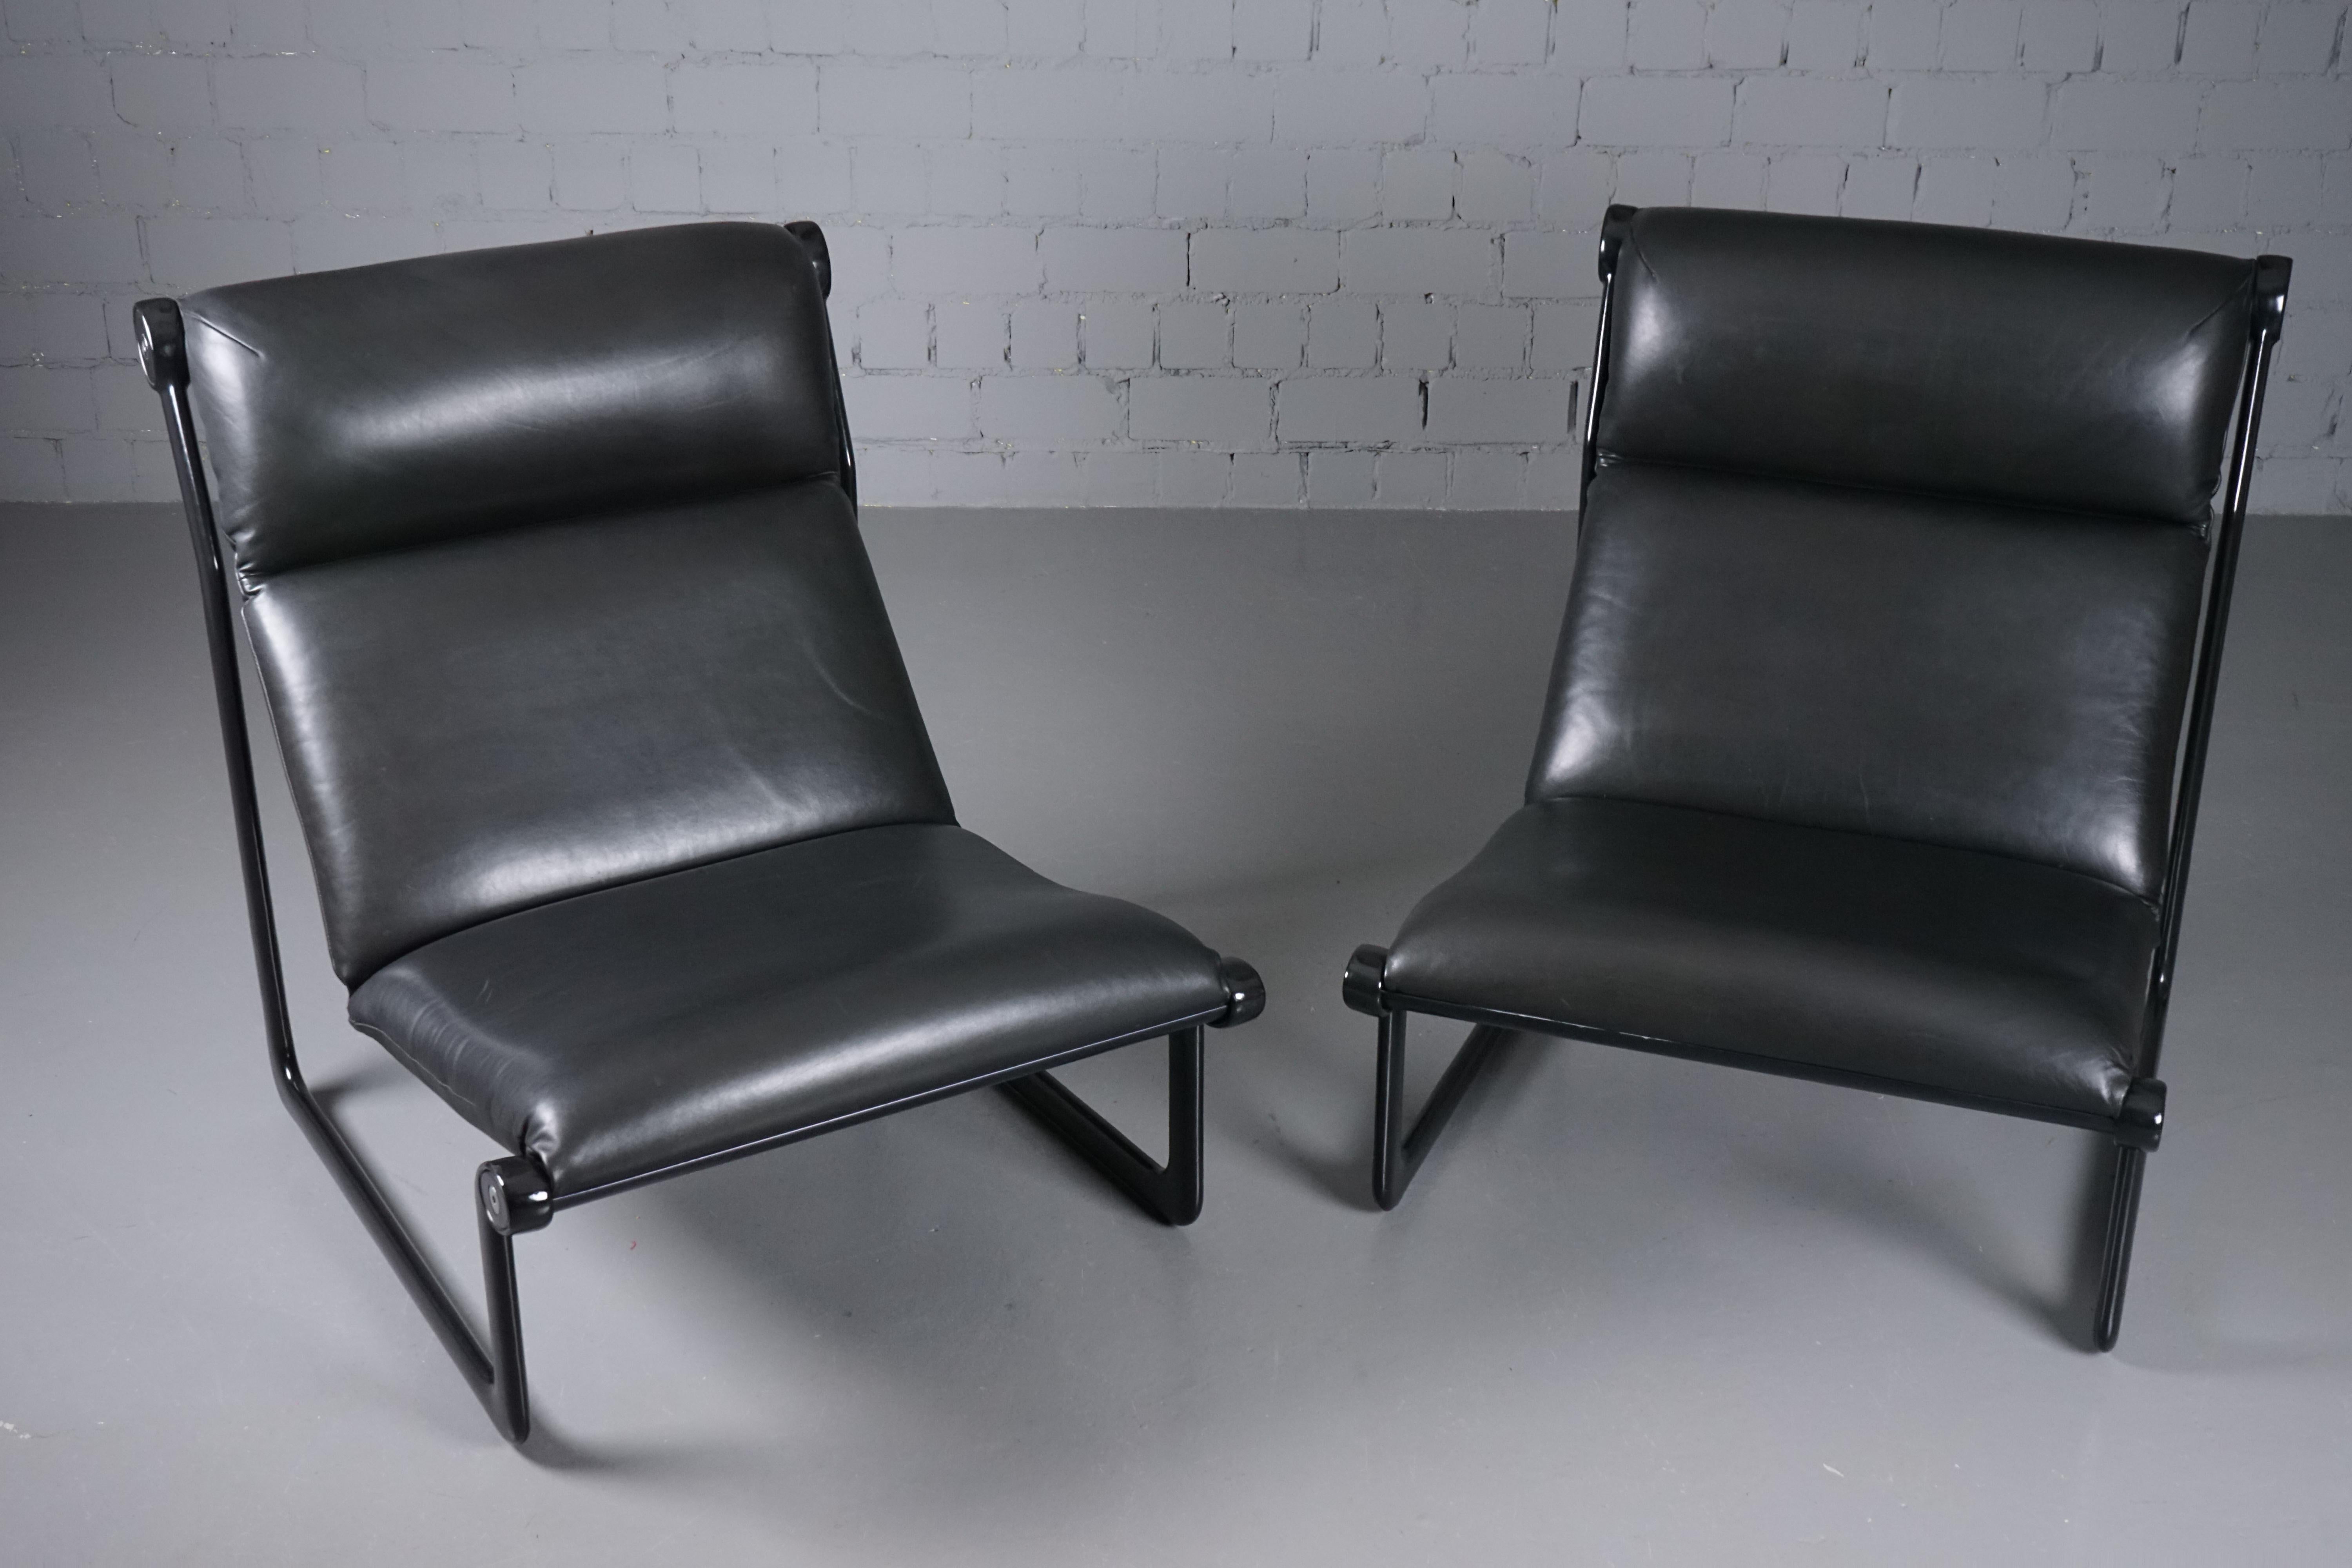 Arm Chair Modell 2001 by Bruce Hannah & Andrew I. Morrison for Knoll Set of 2 For Sale 2